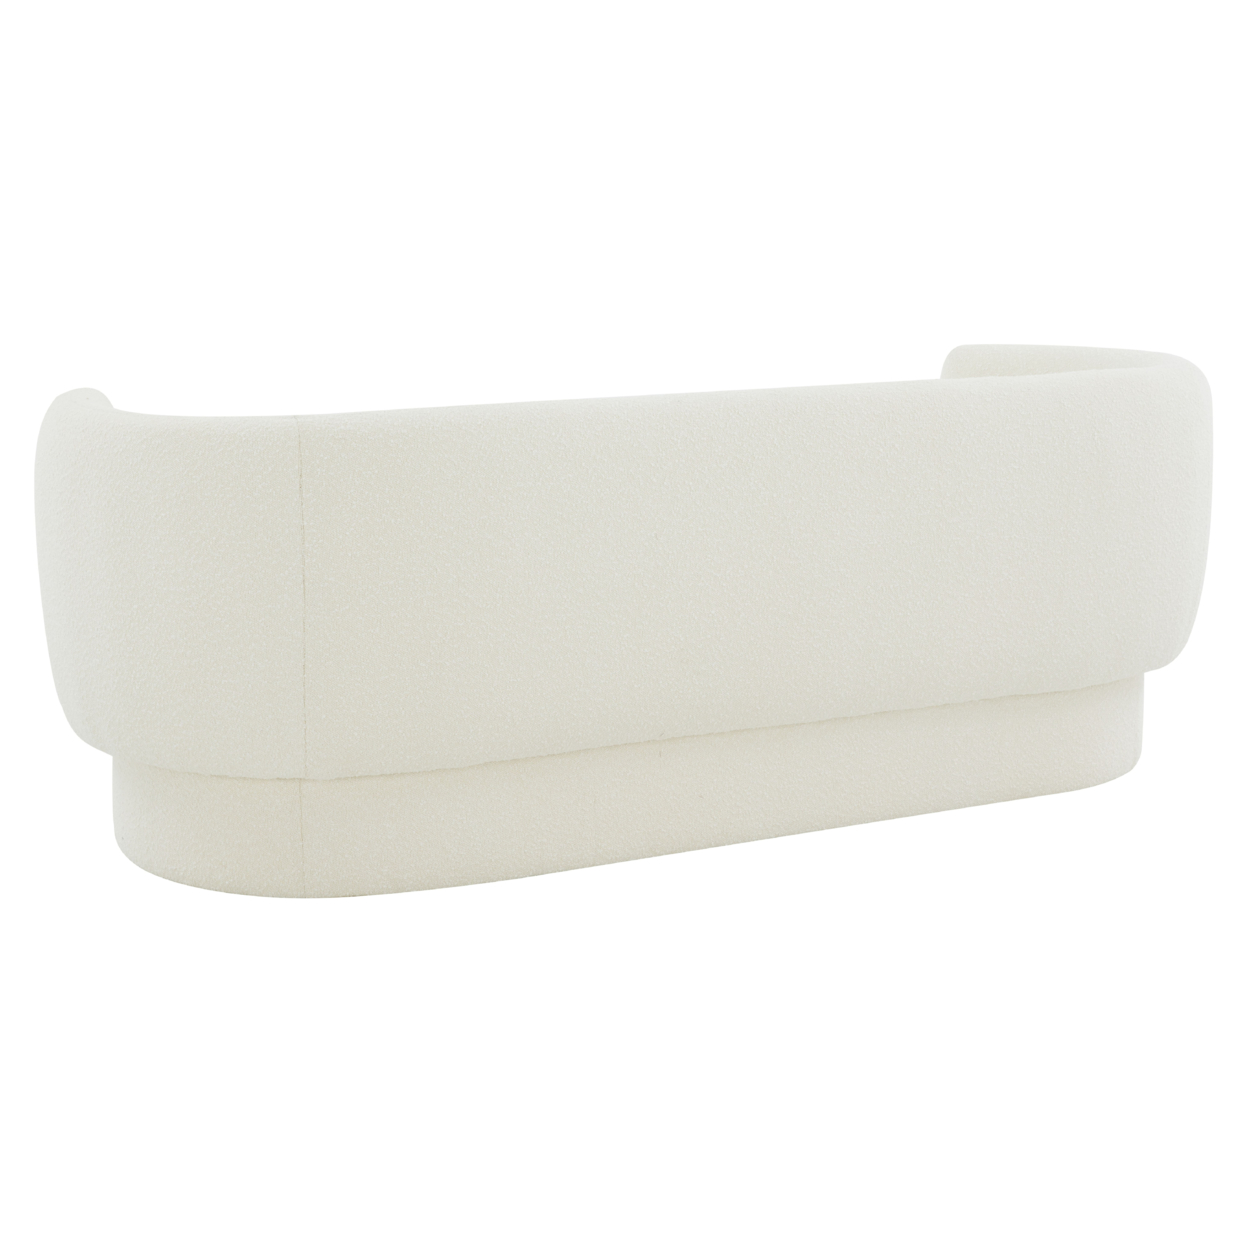 SAFAVIEH COUTURE Mariano Curved Sofa Ivory